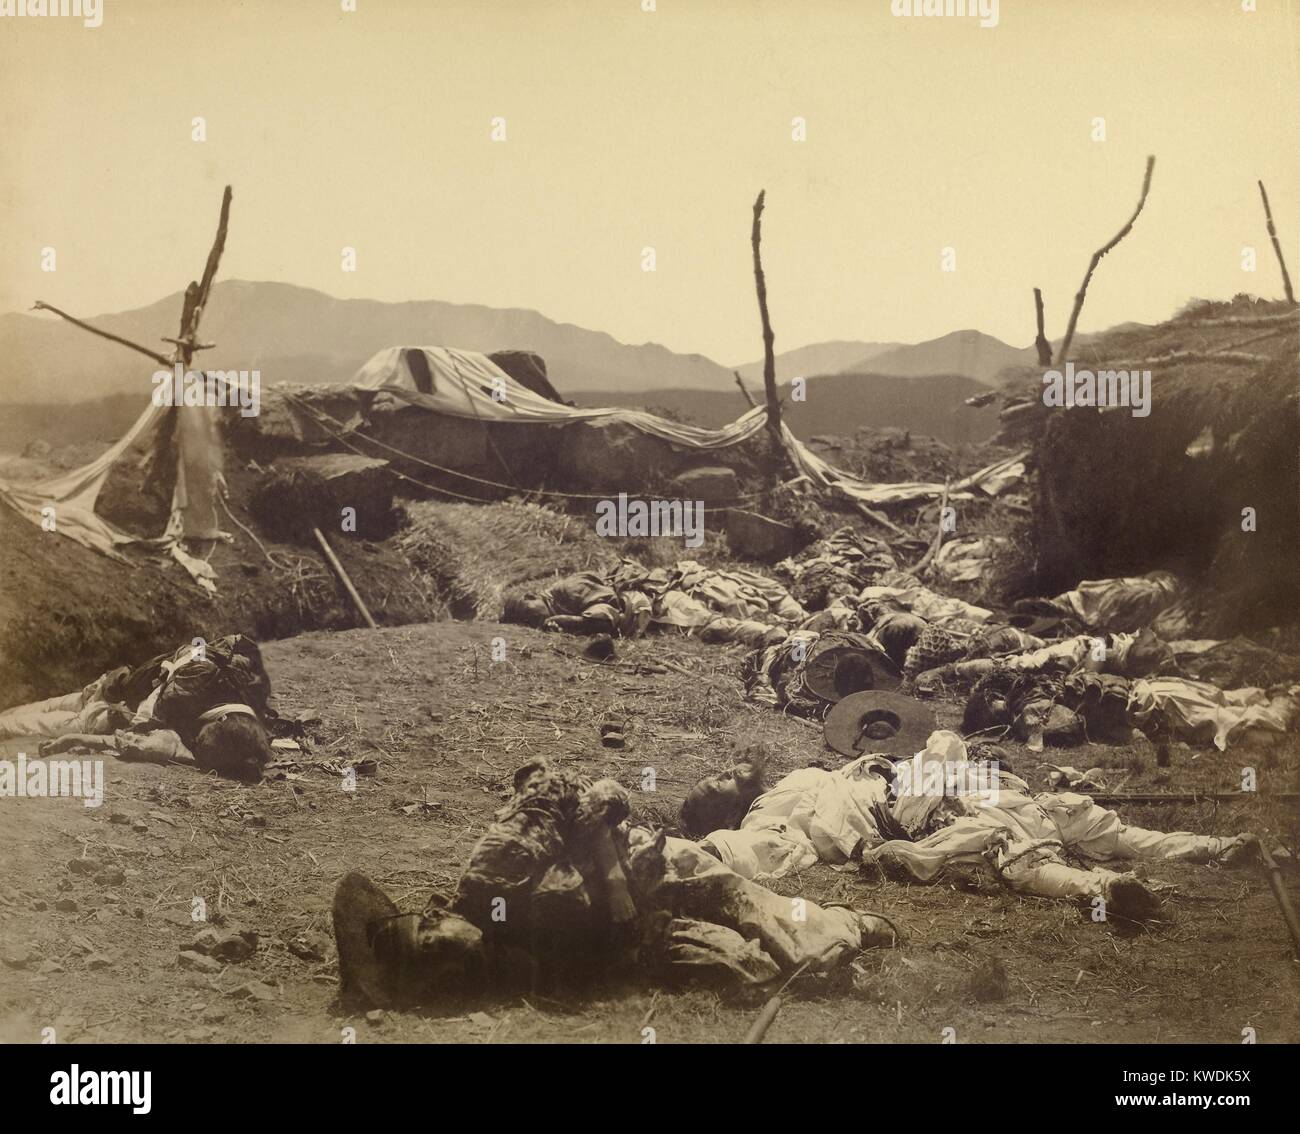 Gwangseong Garrison, a Korean citadel with several dead Korean soldiers, after US punitive attack. June 11, 1871. A force of 546 sailors and 105 Marines from the US squadron overwhelmed Koreans and their antiquated weapons (BSLOC 2017 18 67) Stock Photo